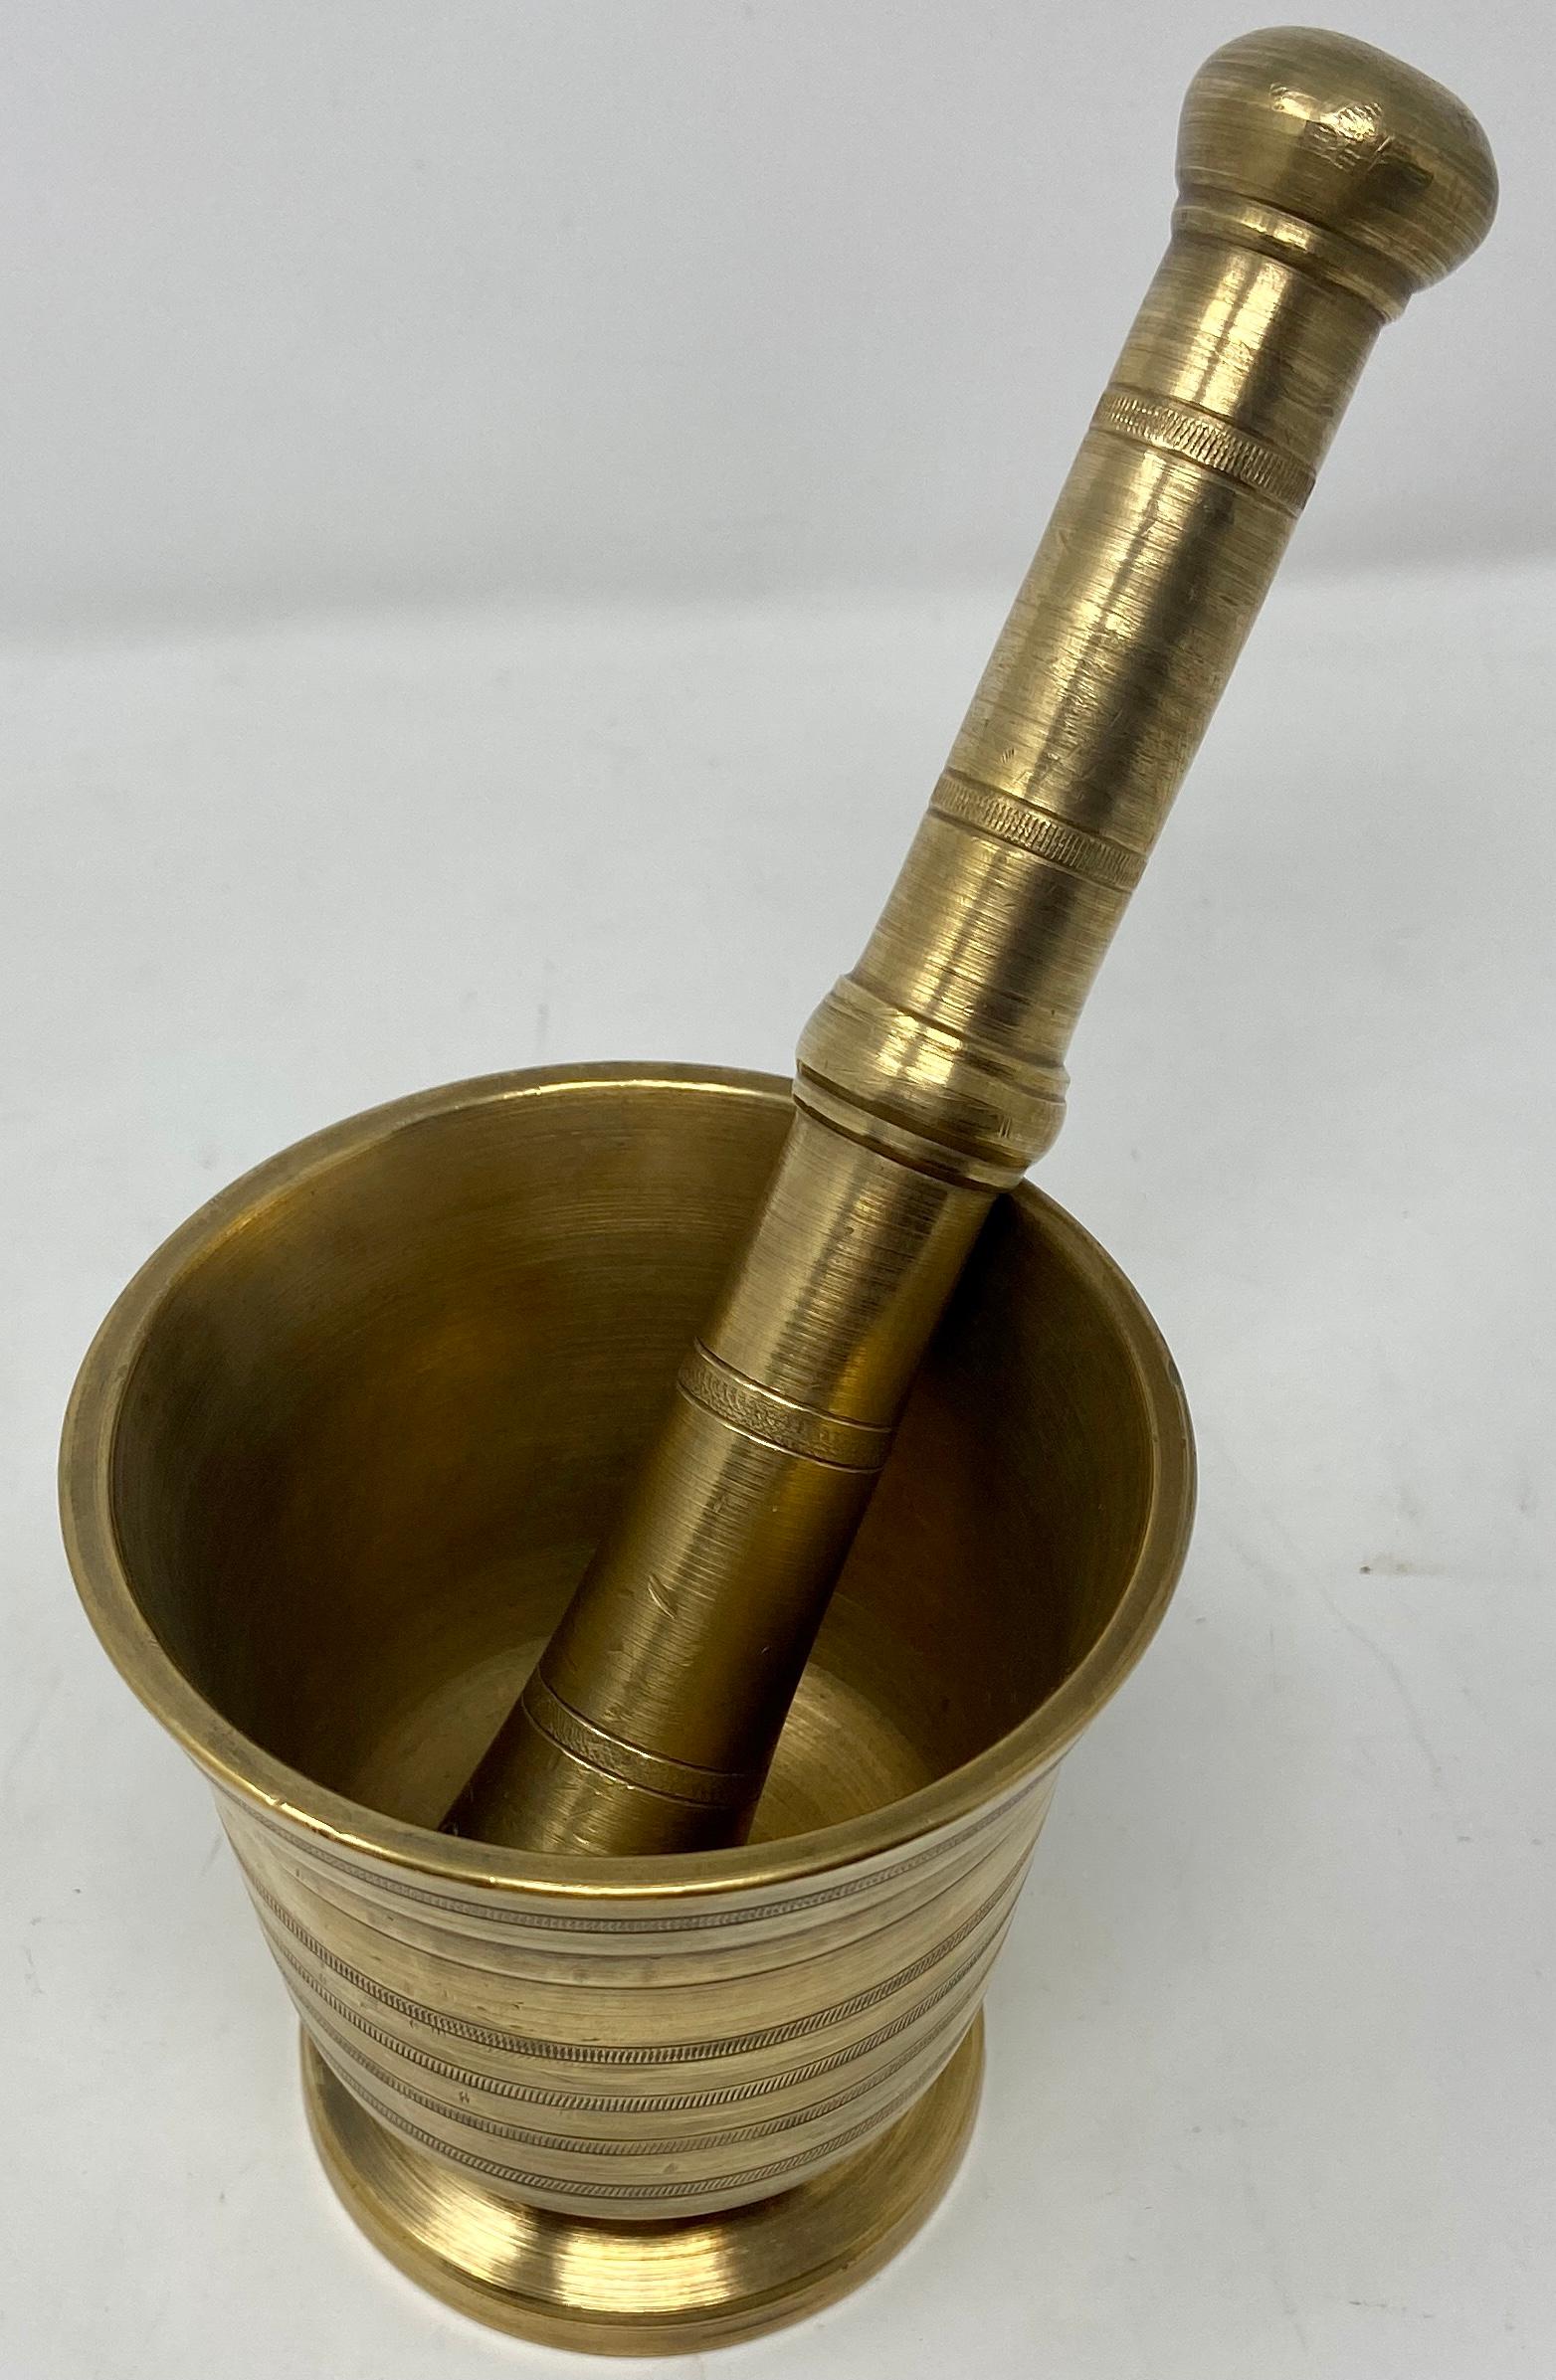 Antique English bronze mortar and pestle, Circa 1880-1890. 
Used in both household kitchens and apothecaries / pharmacies for centuries.